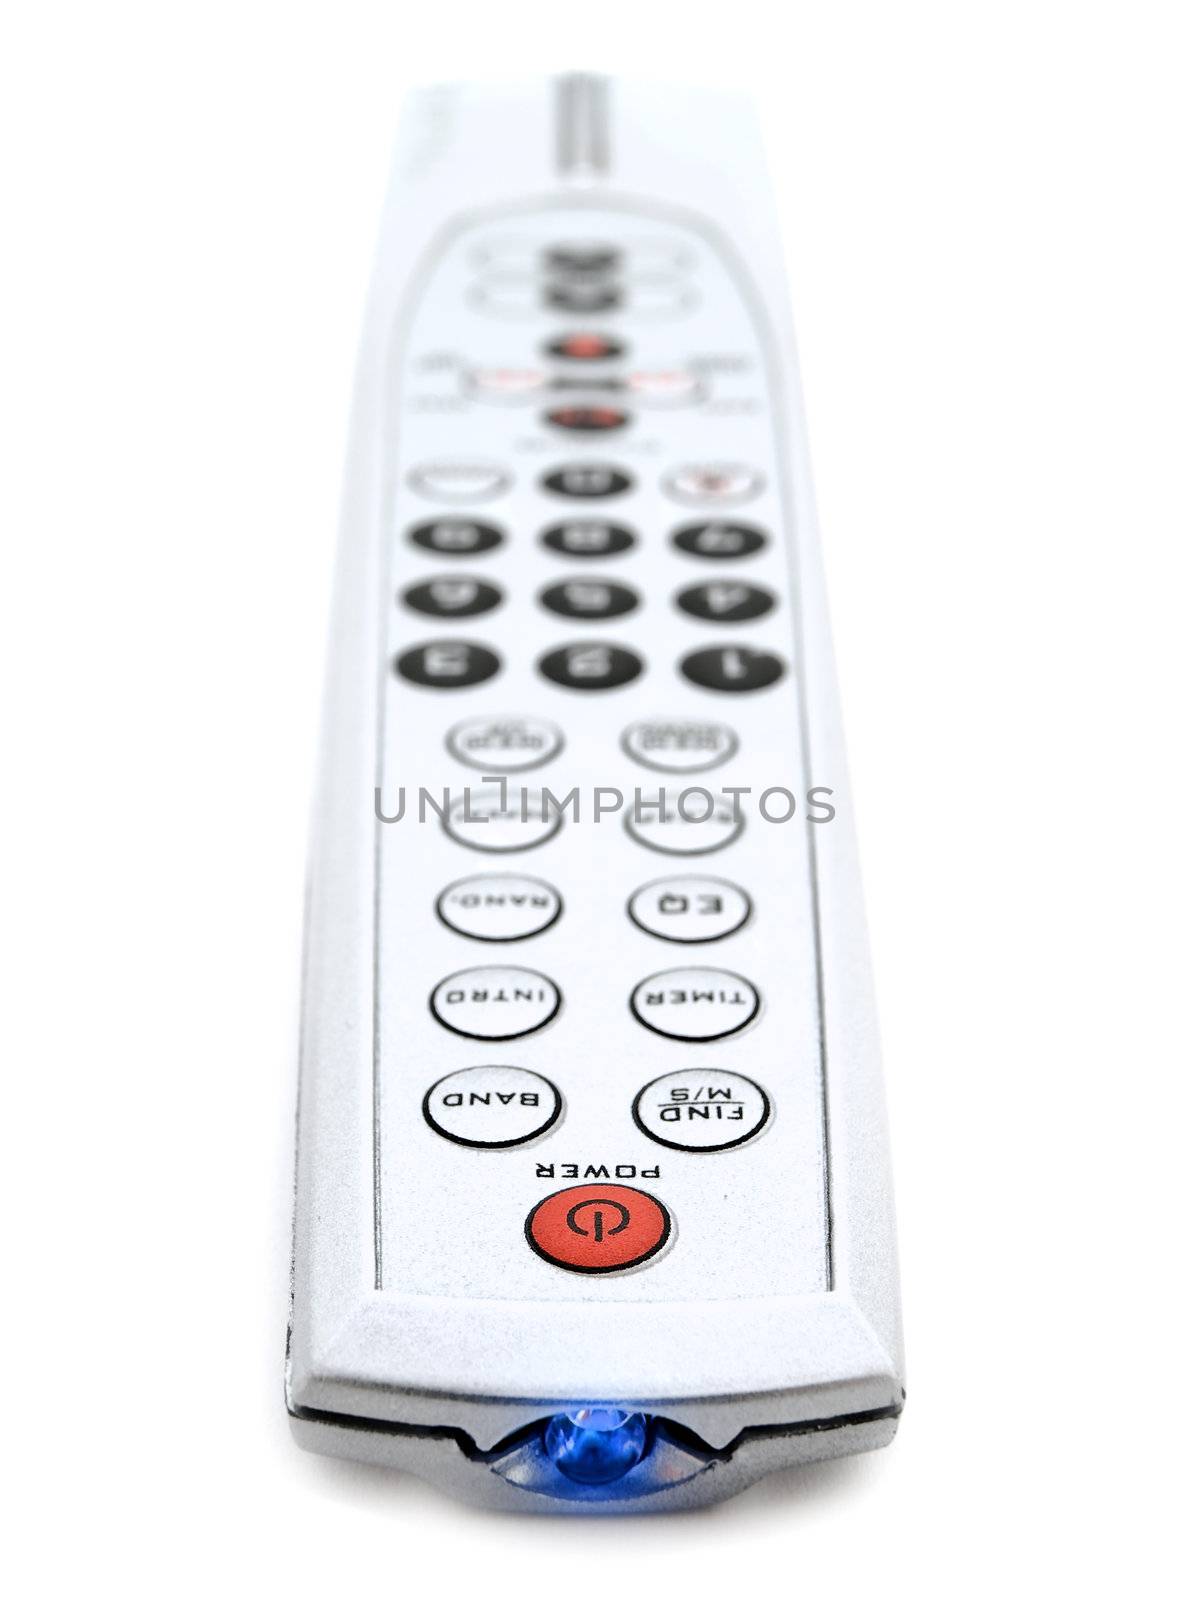 Single modern remote control over the white background 